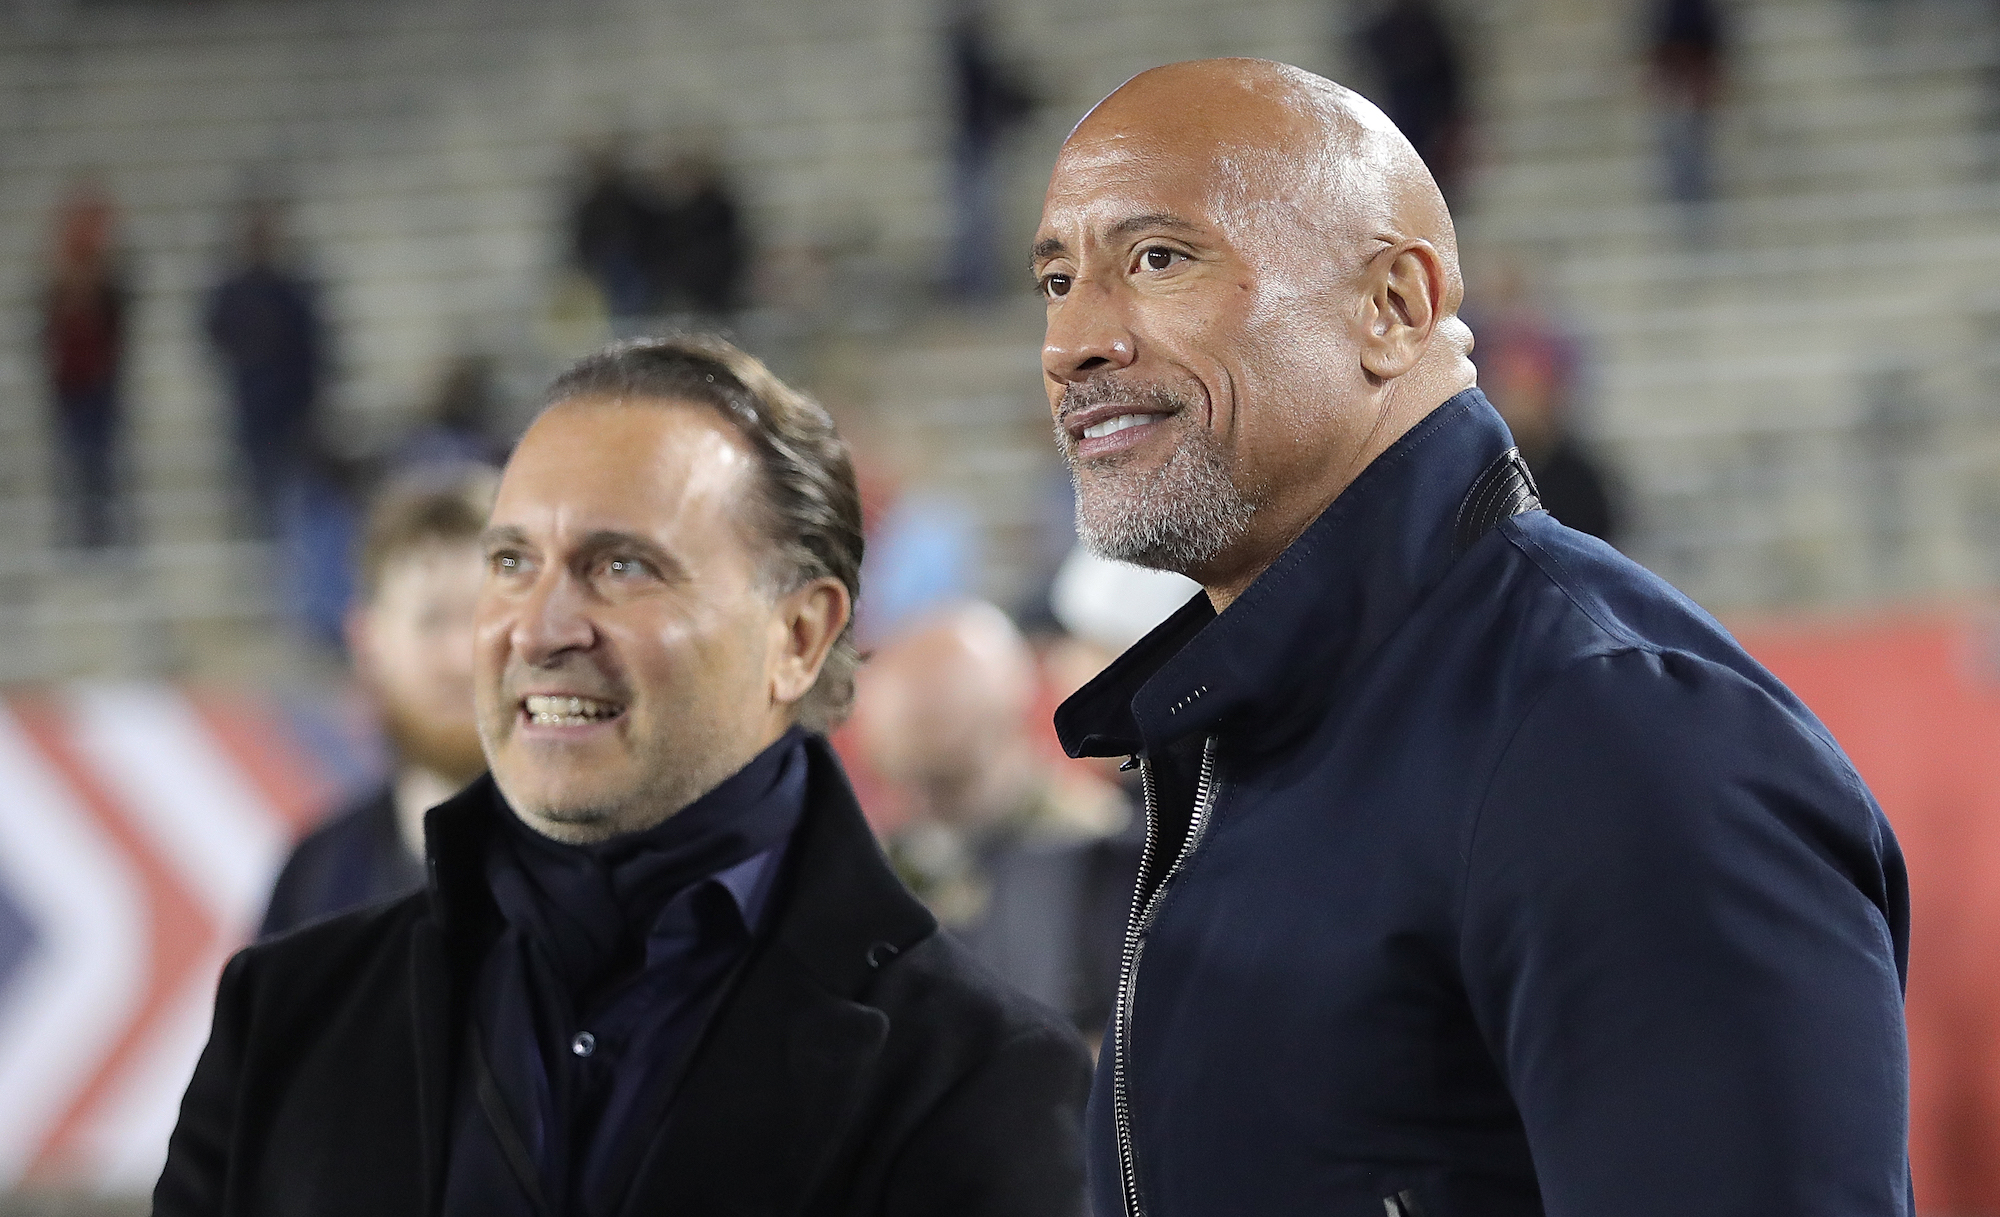 dwayne ‘the rock’ johnson’s new ‘united football league’ merging the xfl and usfl to begin play this spring